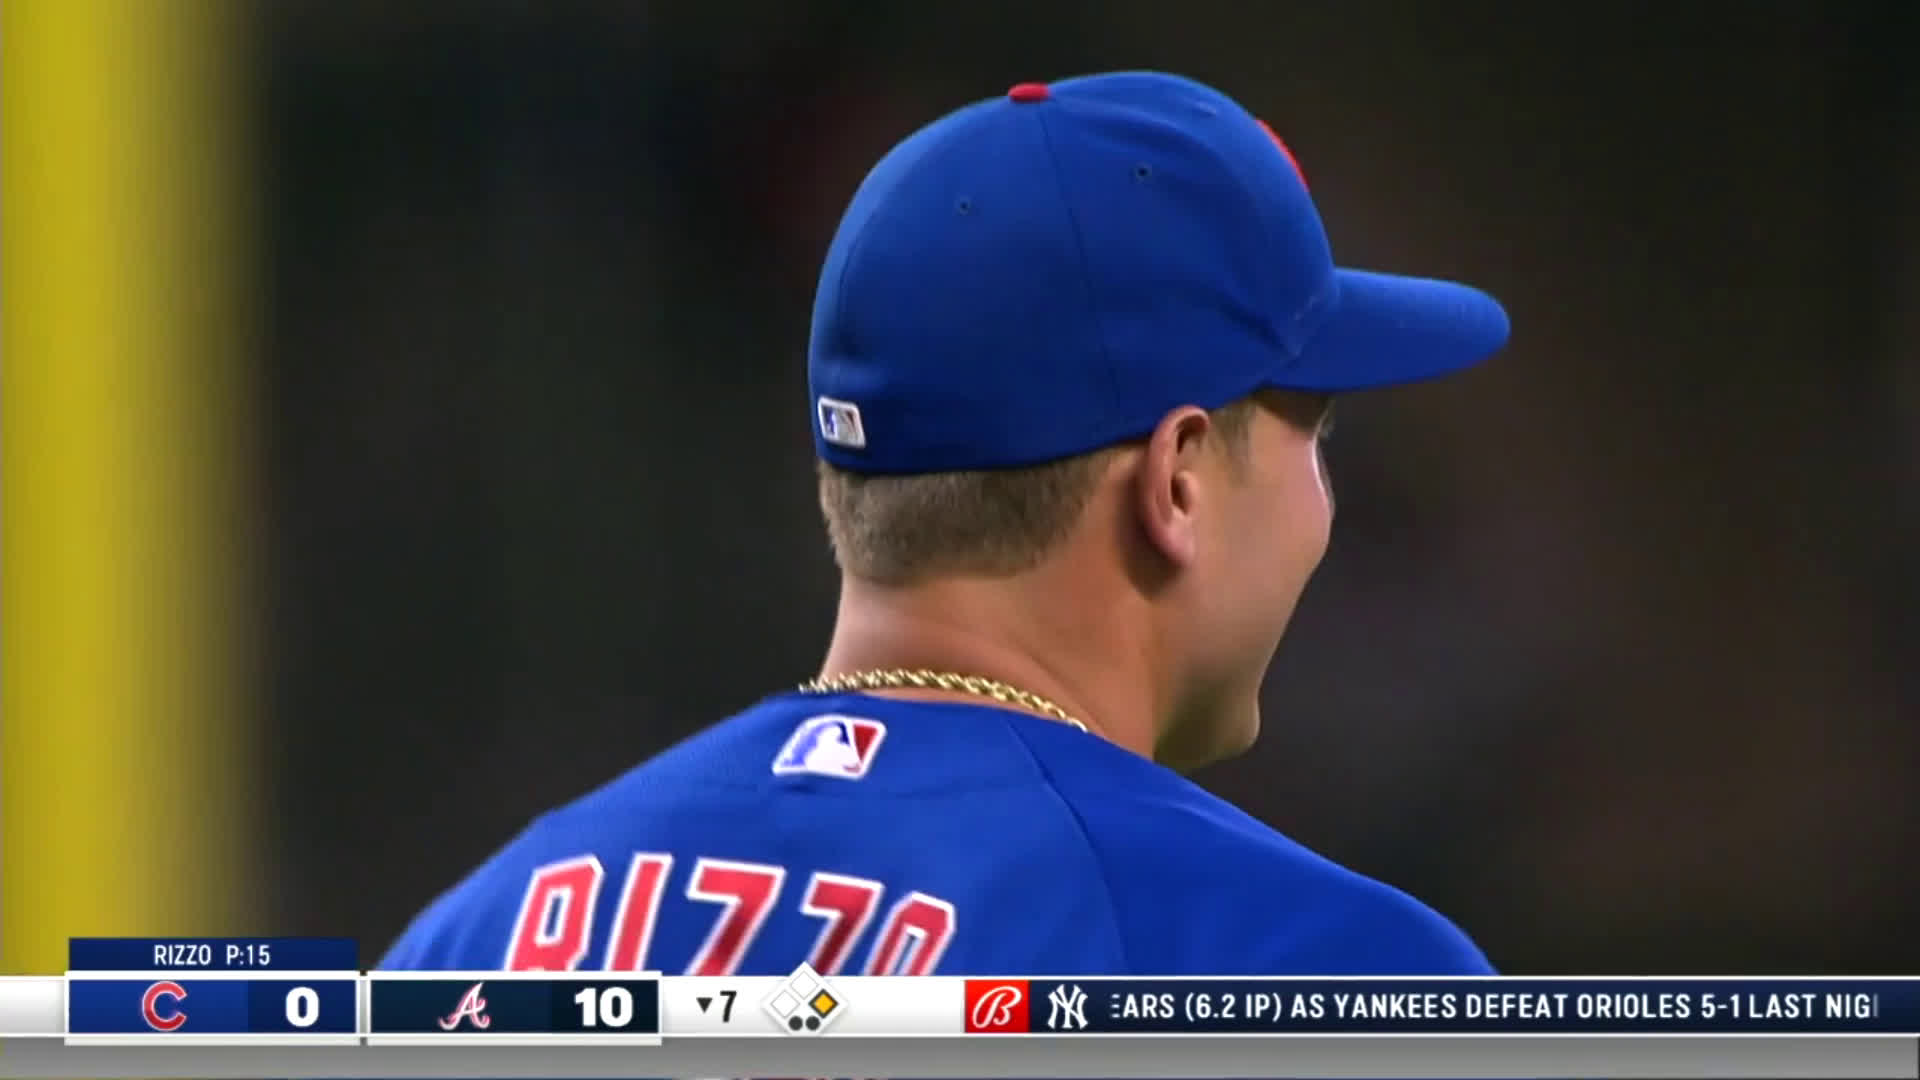 Anthony Rizzo hitting (and getting hit) often for otherwise quiet